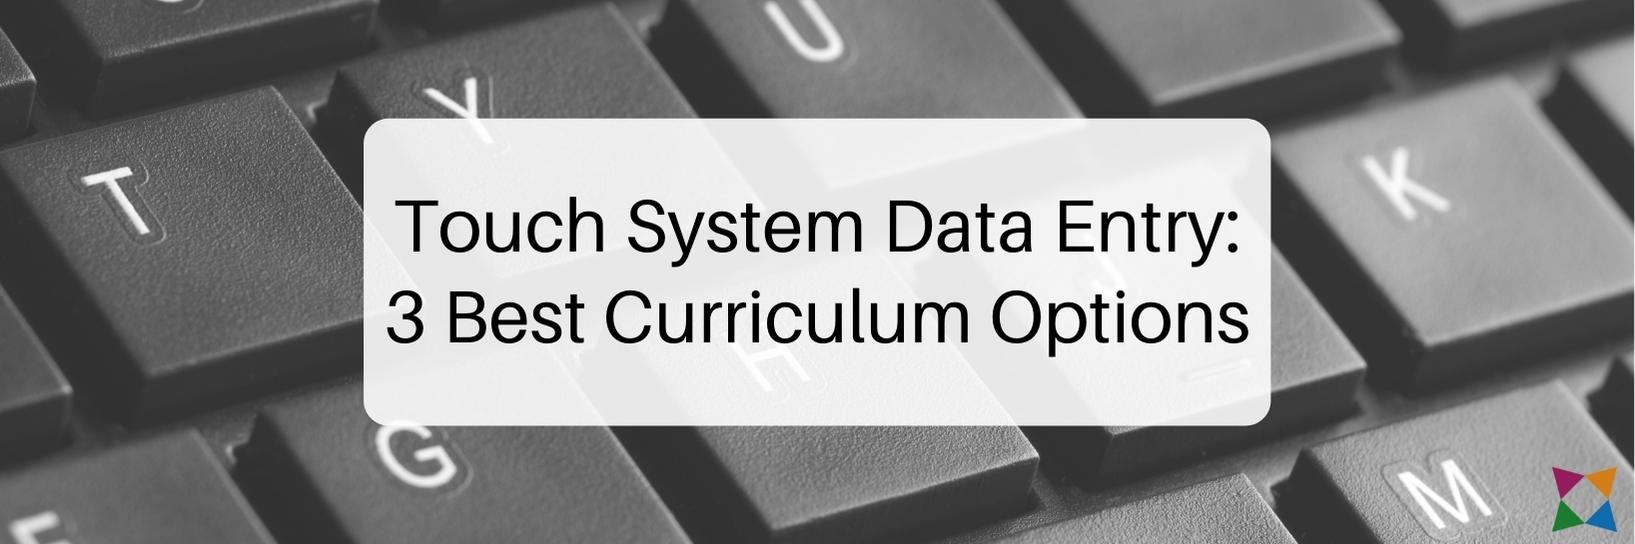 Touch System Data Entry: 3 Best Curriculum Options